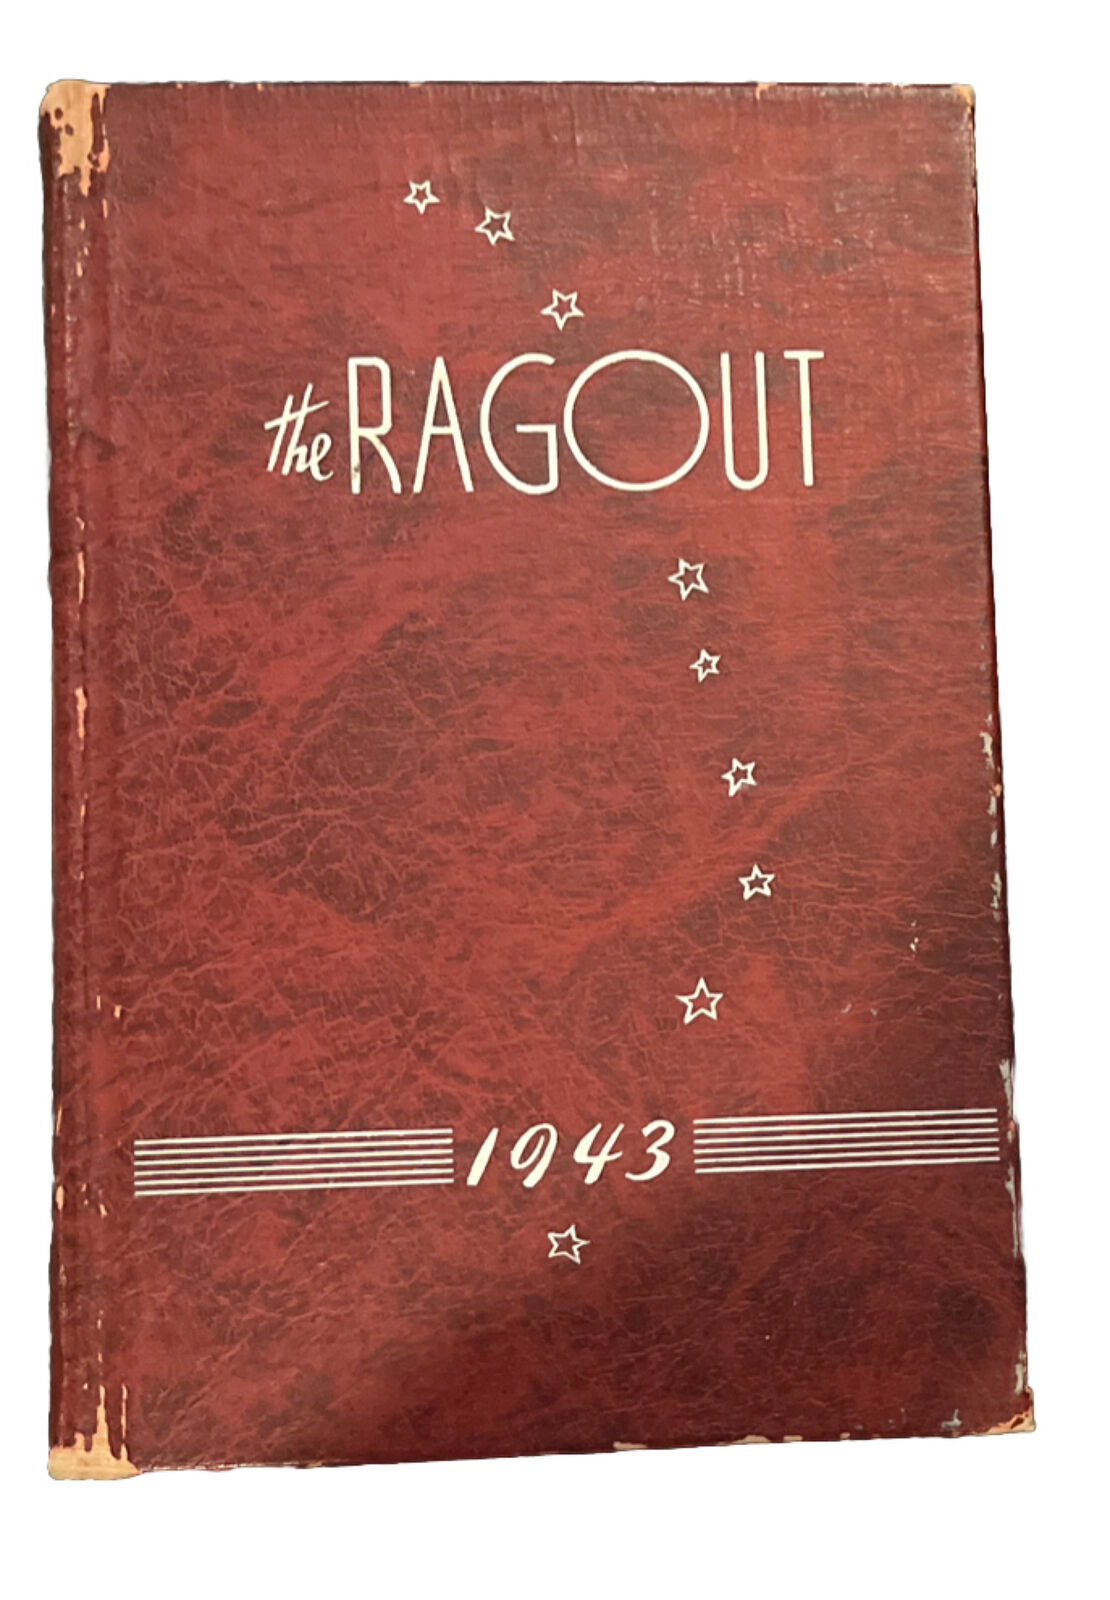 Antique Yearbook The Ragout 1943 Central College Fayette, Missouri